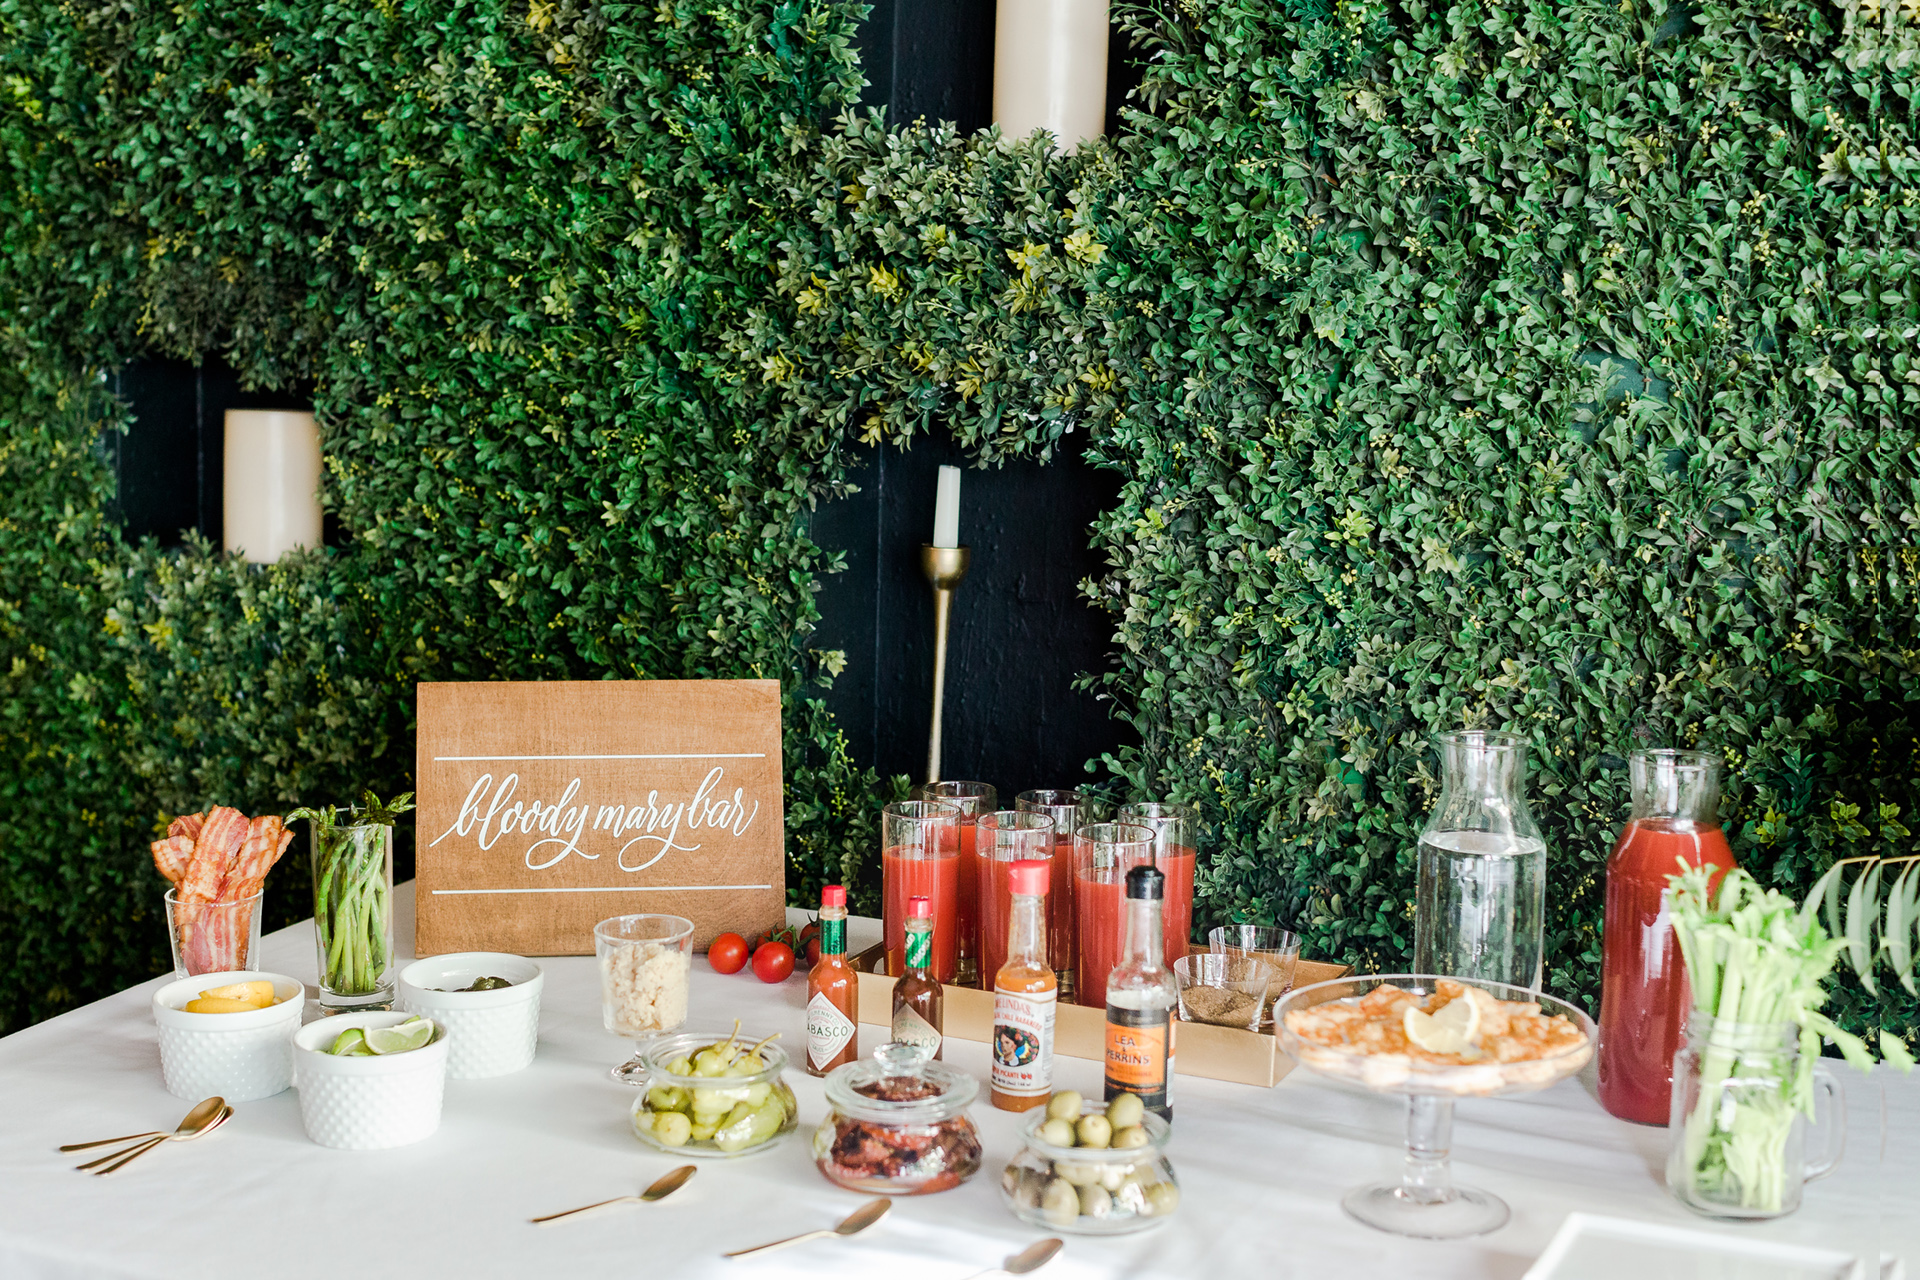 A bloody Mary bar from an event hosted by Ristorante Beatrice.